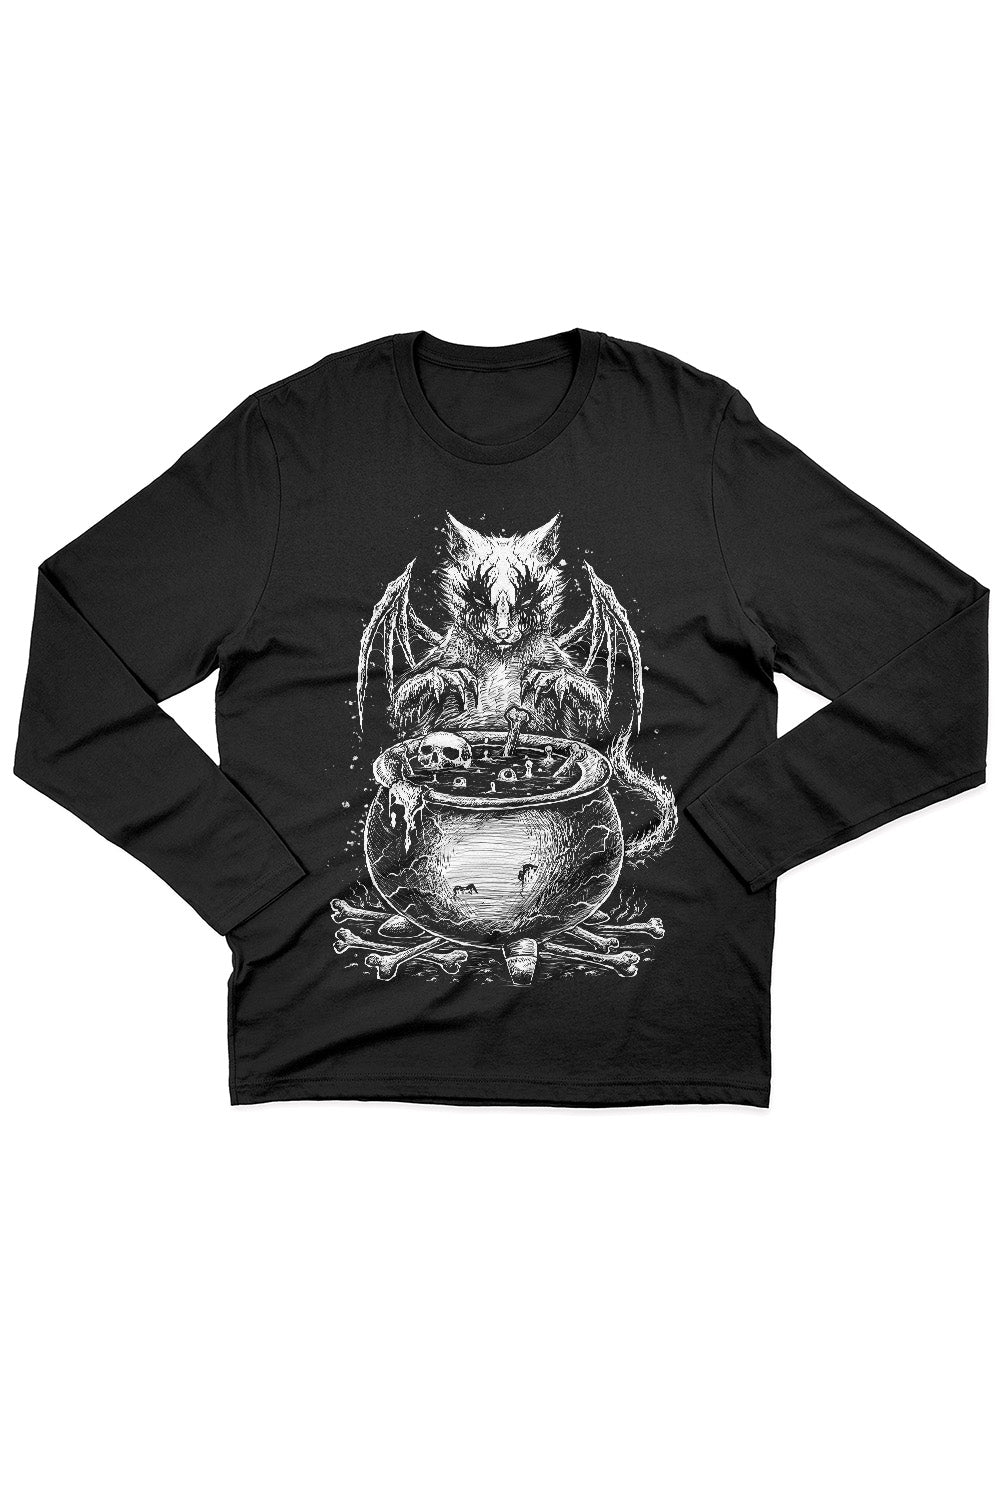 Conjuring Cat Tee [Multiple Styles Available]